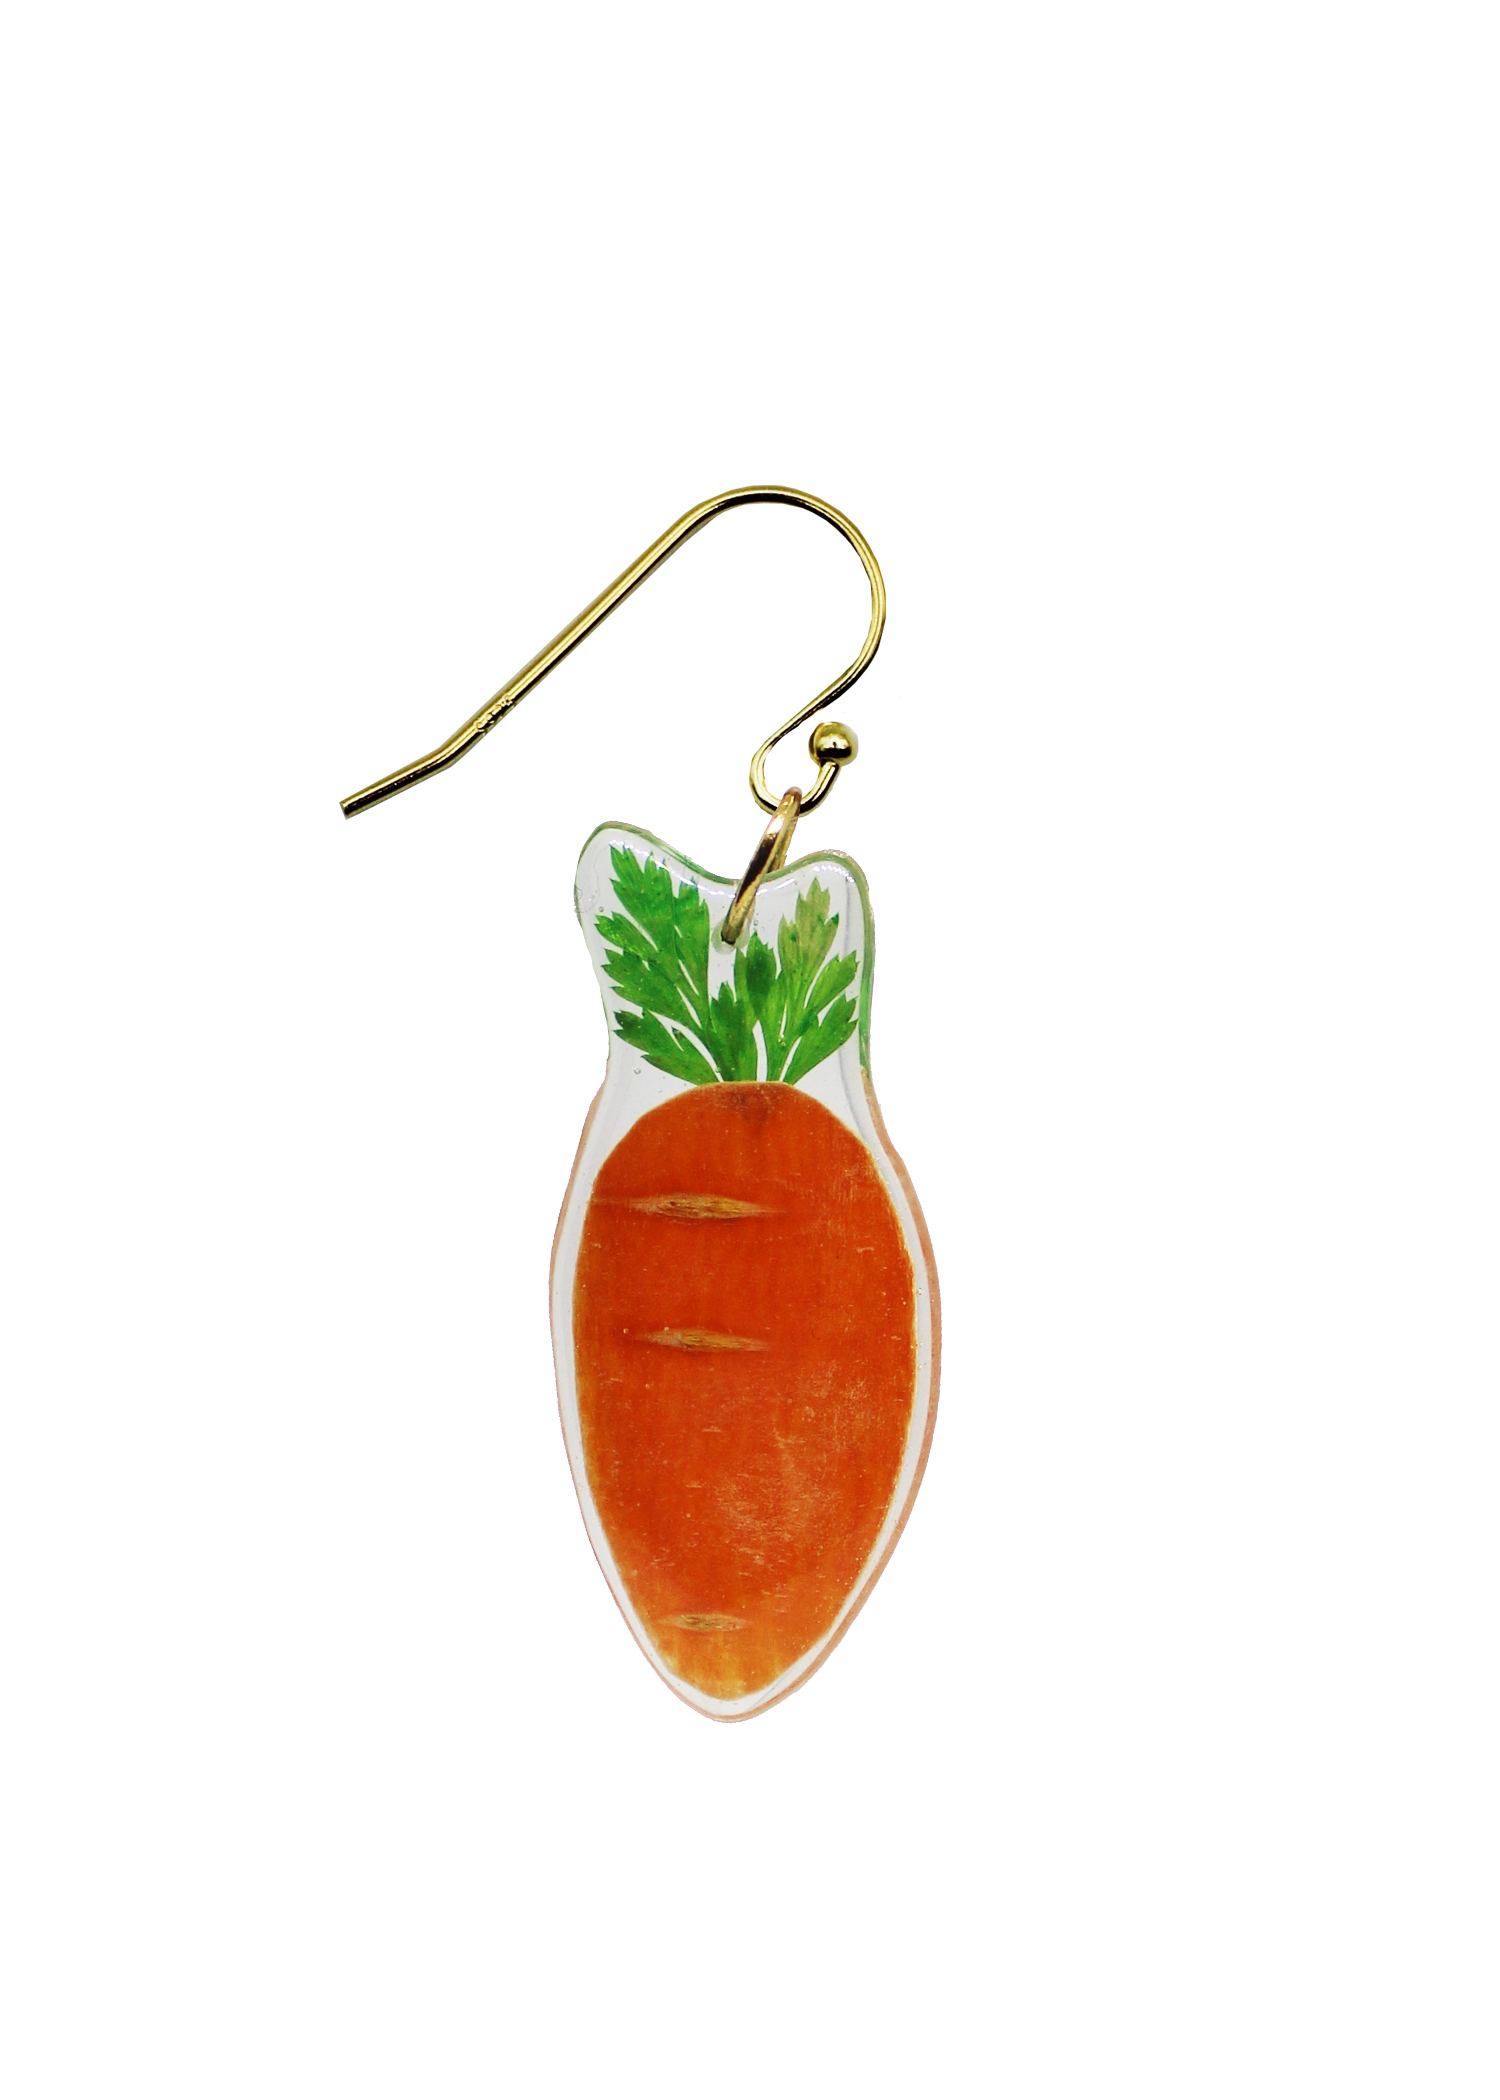 Resin Coated Miniature Carrot on a French Hook Earring